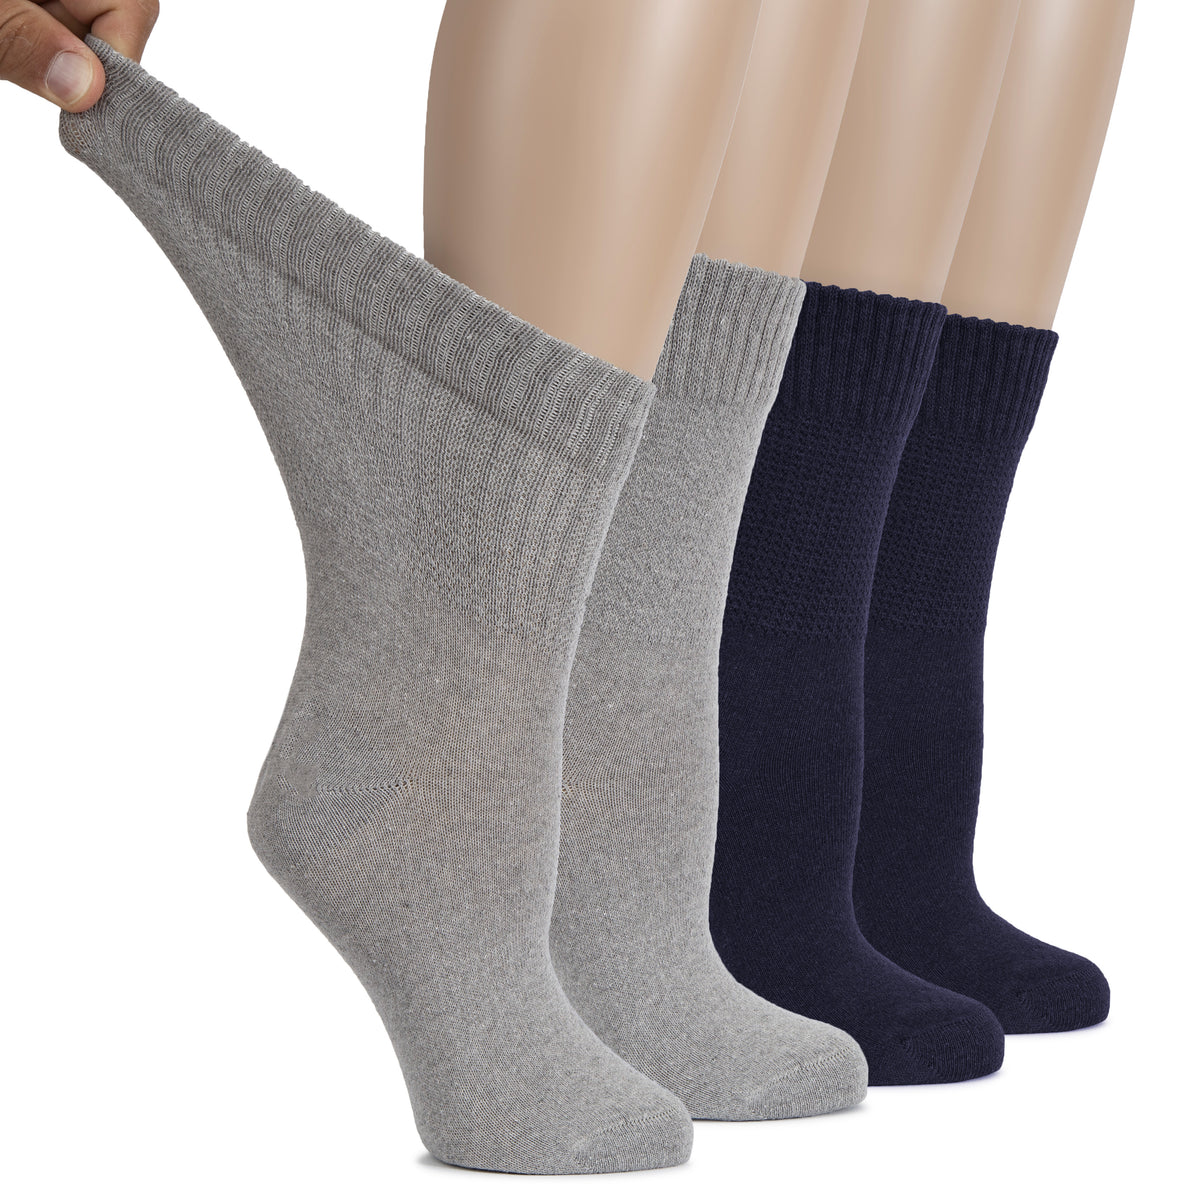 These Women's Diabetic Cotton Crew Socks feature two pairs with alternating blue and grey legs, providing both comfort and style.